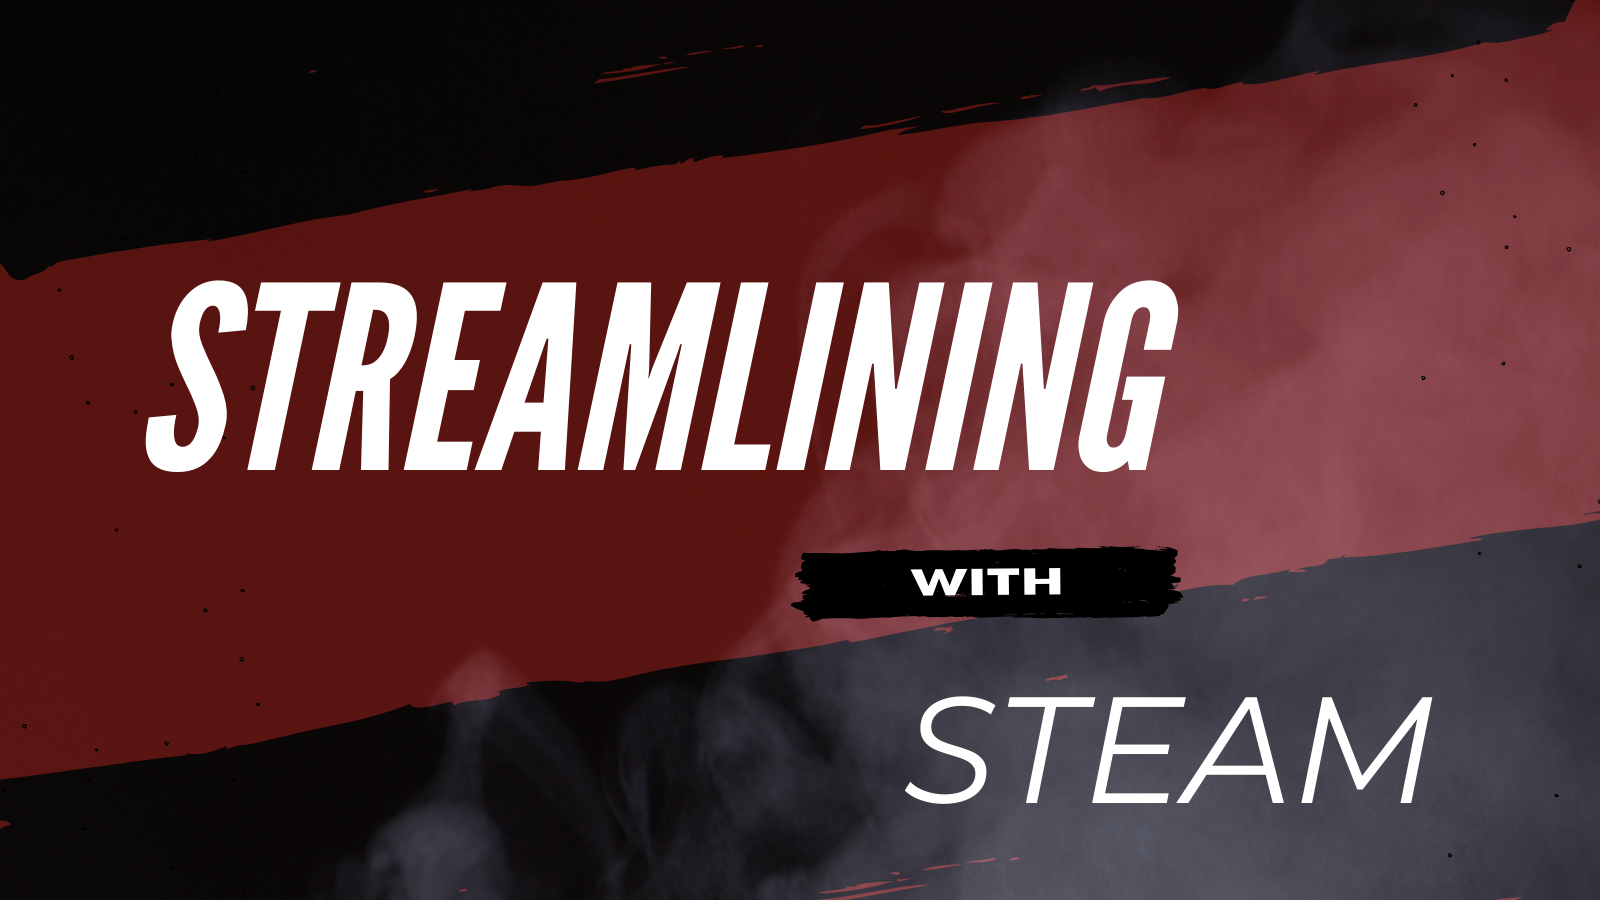 Blog hero image of blog title in white lettering: Streamlining with Steam on a black and red background.